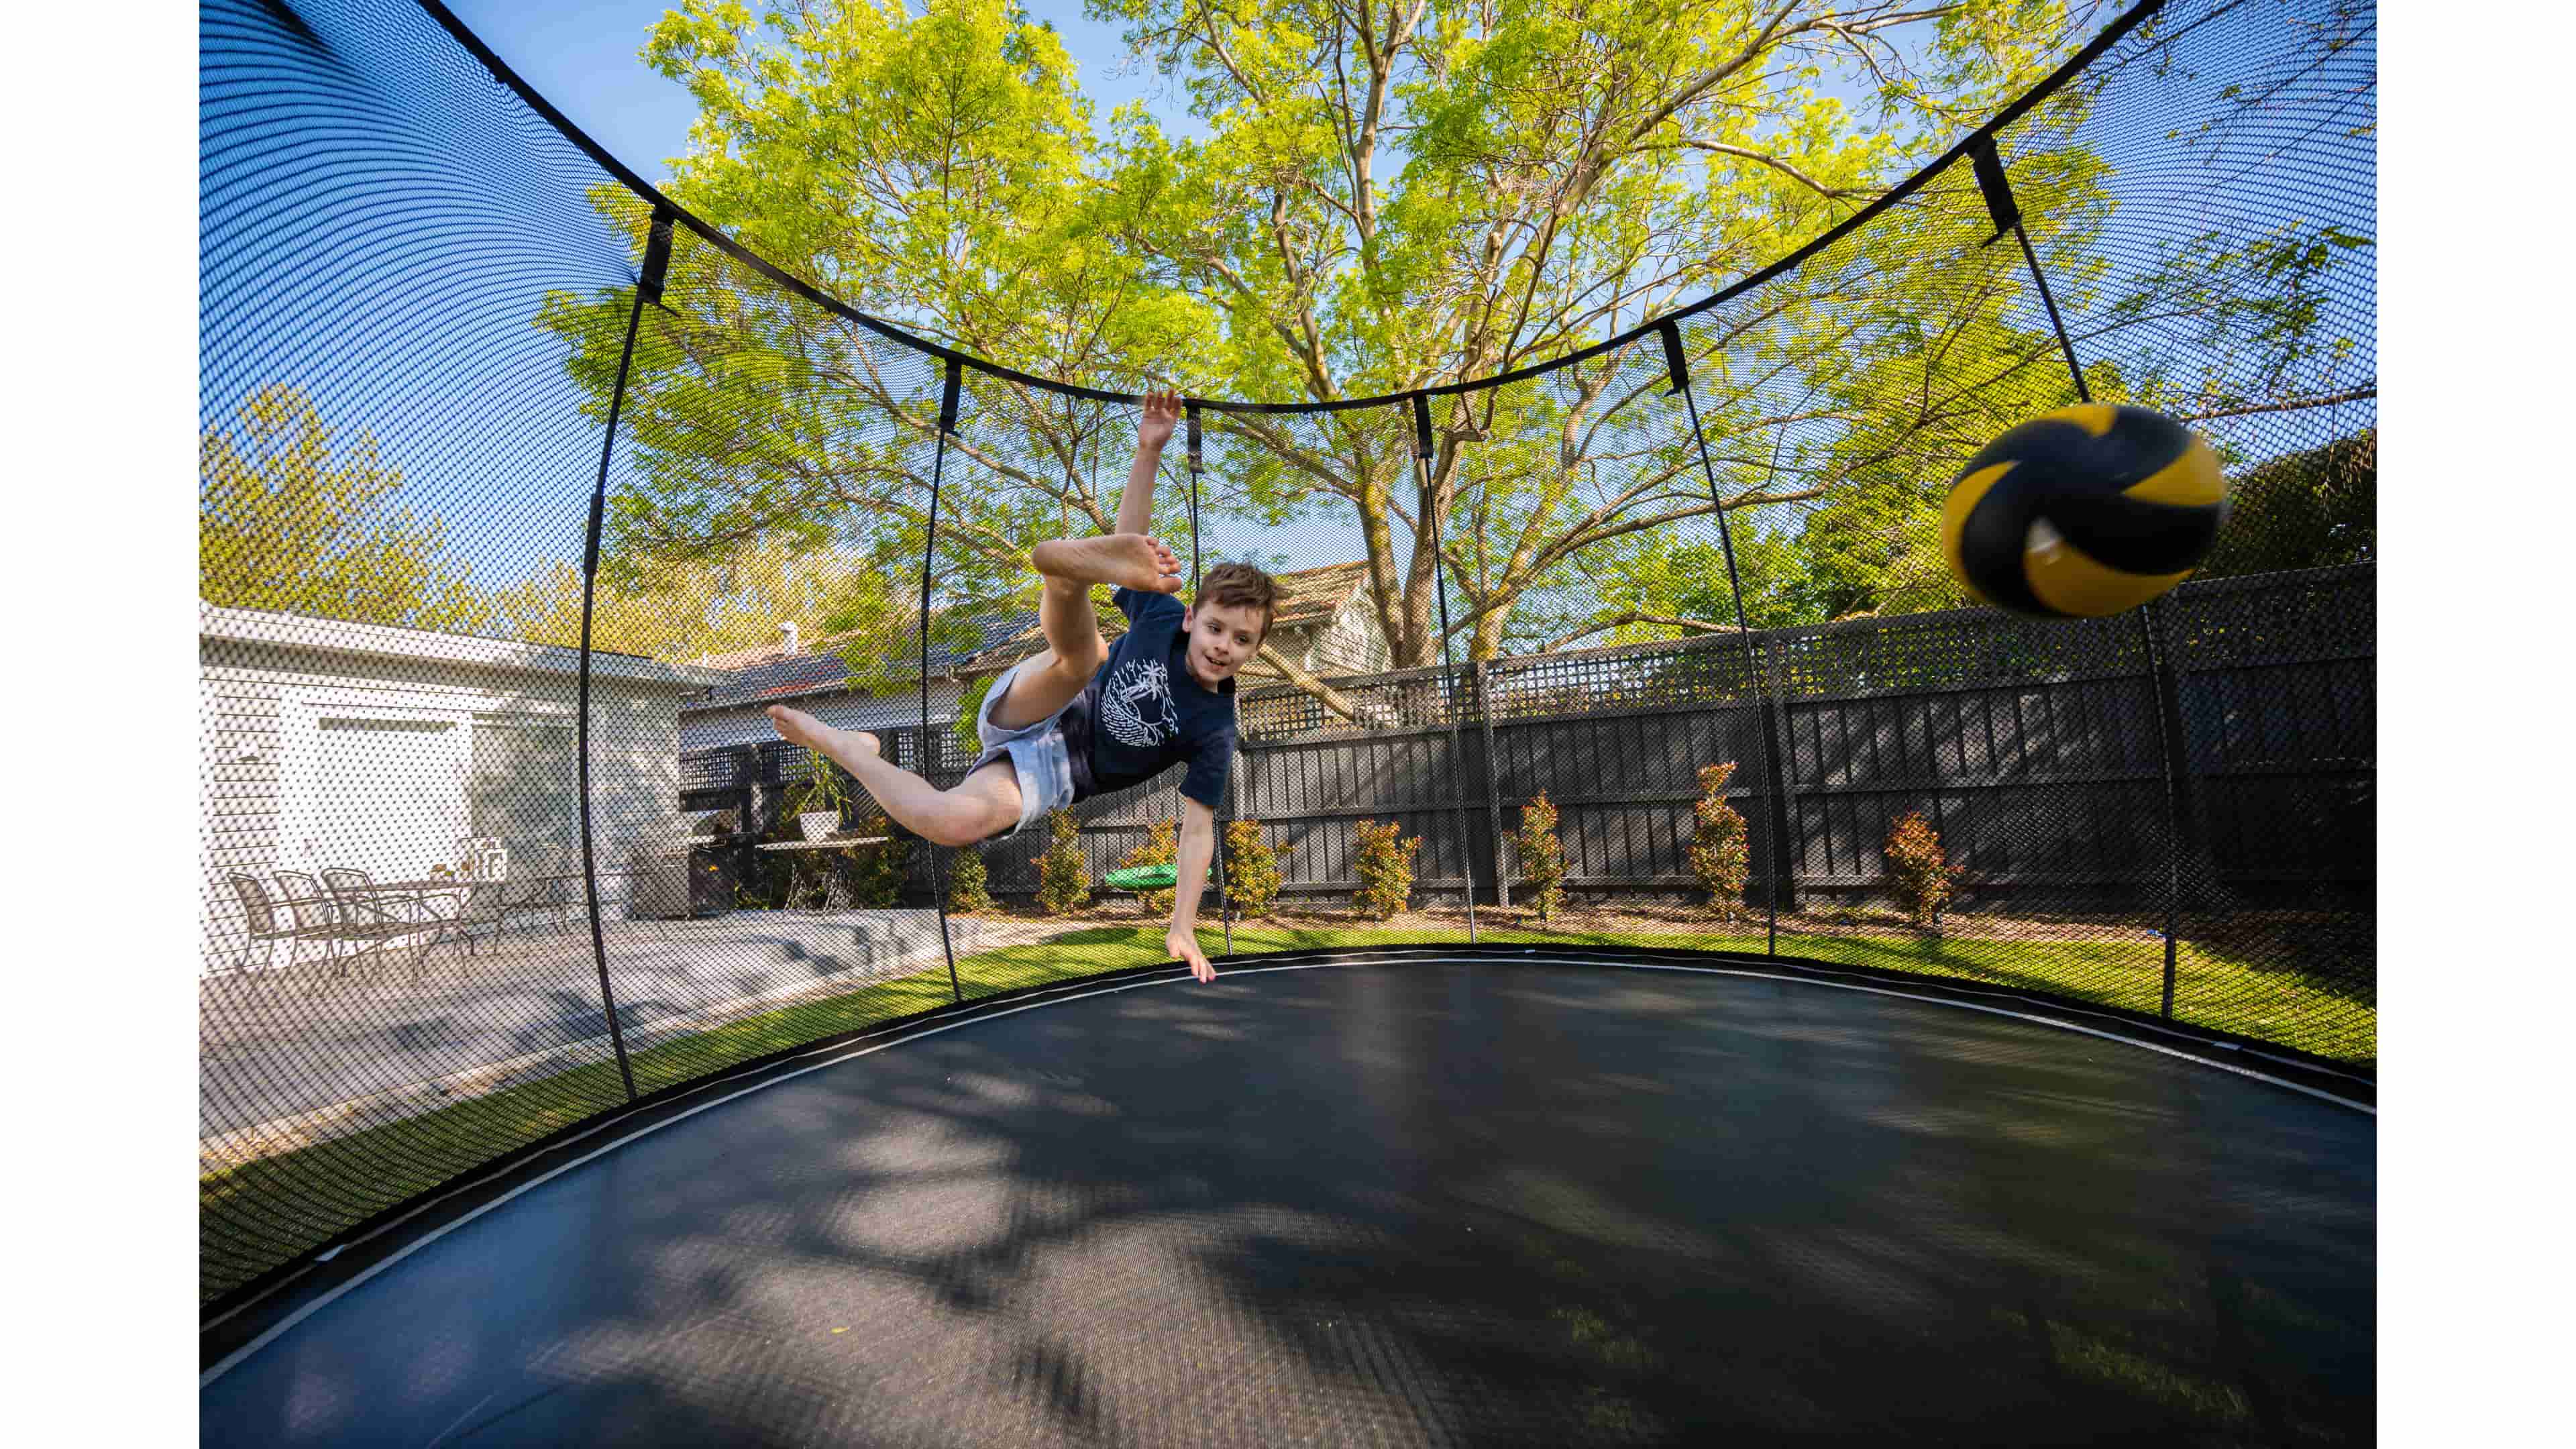 Springfree Trampoline Weight Limits | What You Need to Know 